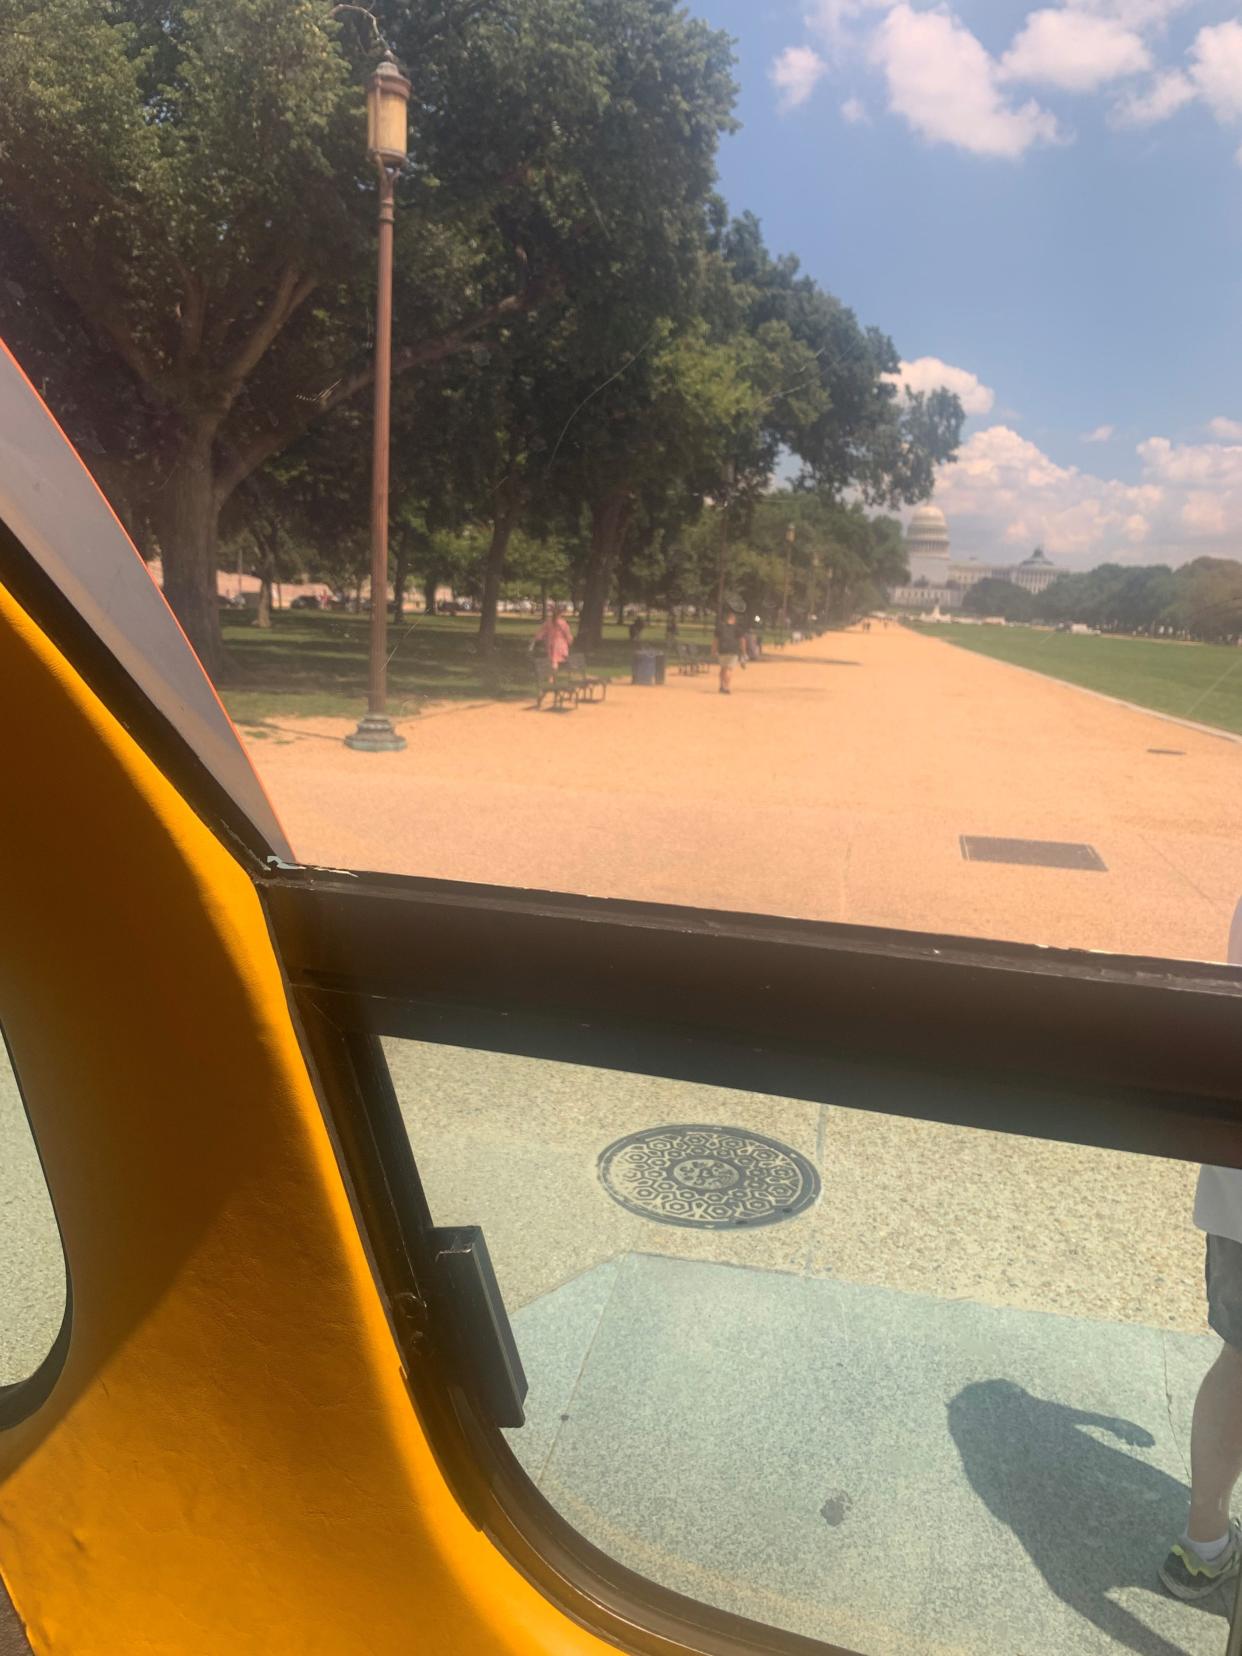 A view through the window of the Wienermobile when it was pulled over on the National Mall in July.